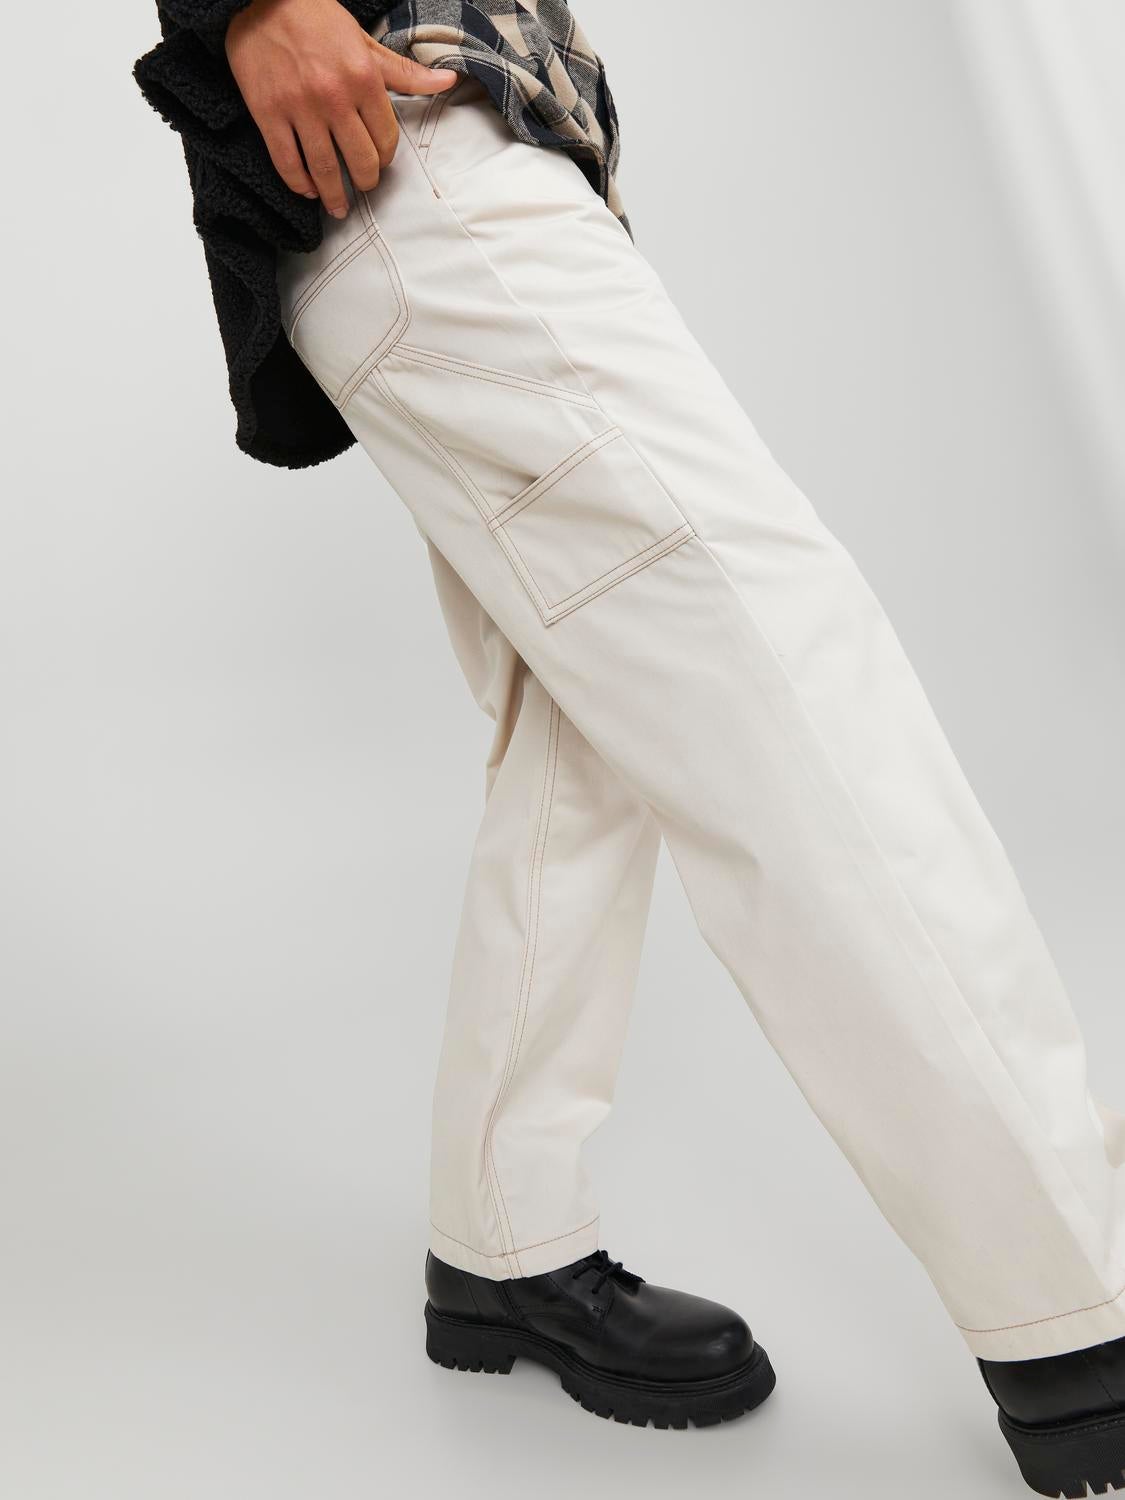 Missy Empire White Amaia High Waisted Cargo Trousers | Shop the latest  fashion online @ DV8